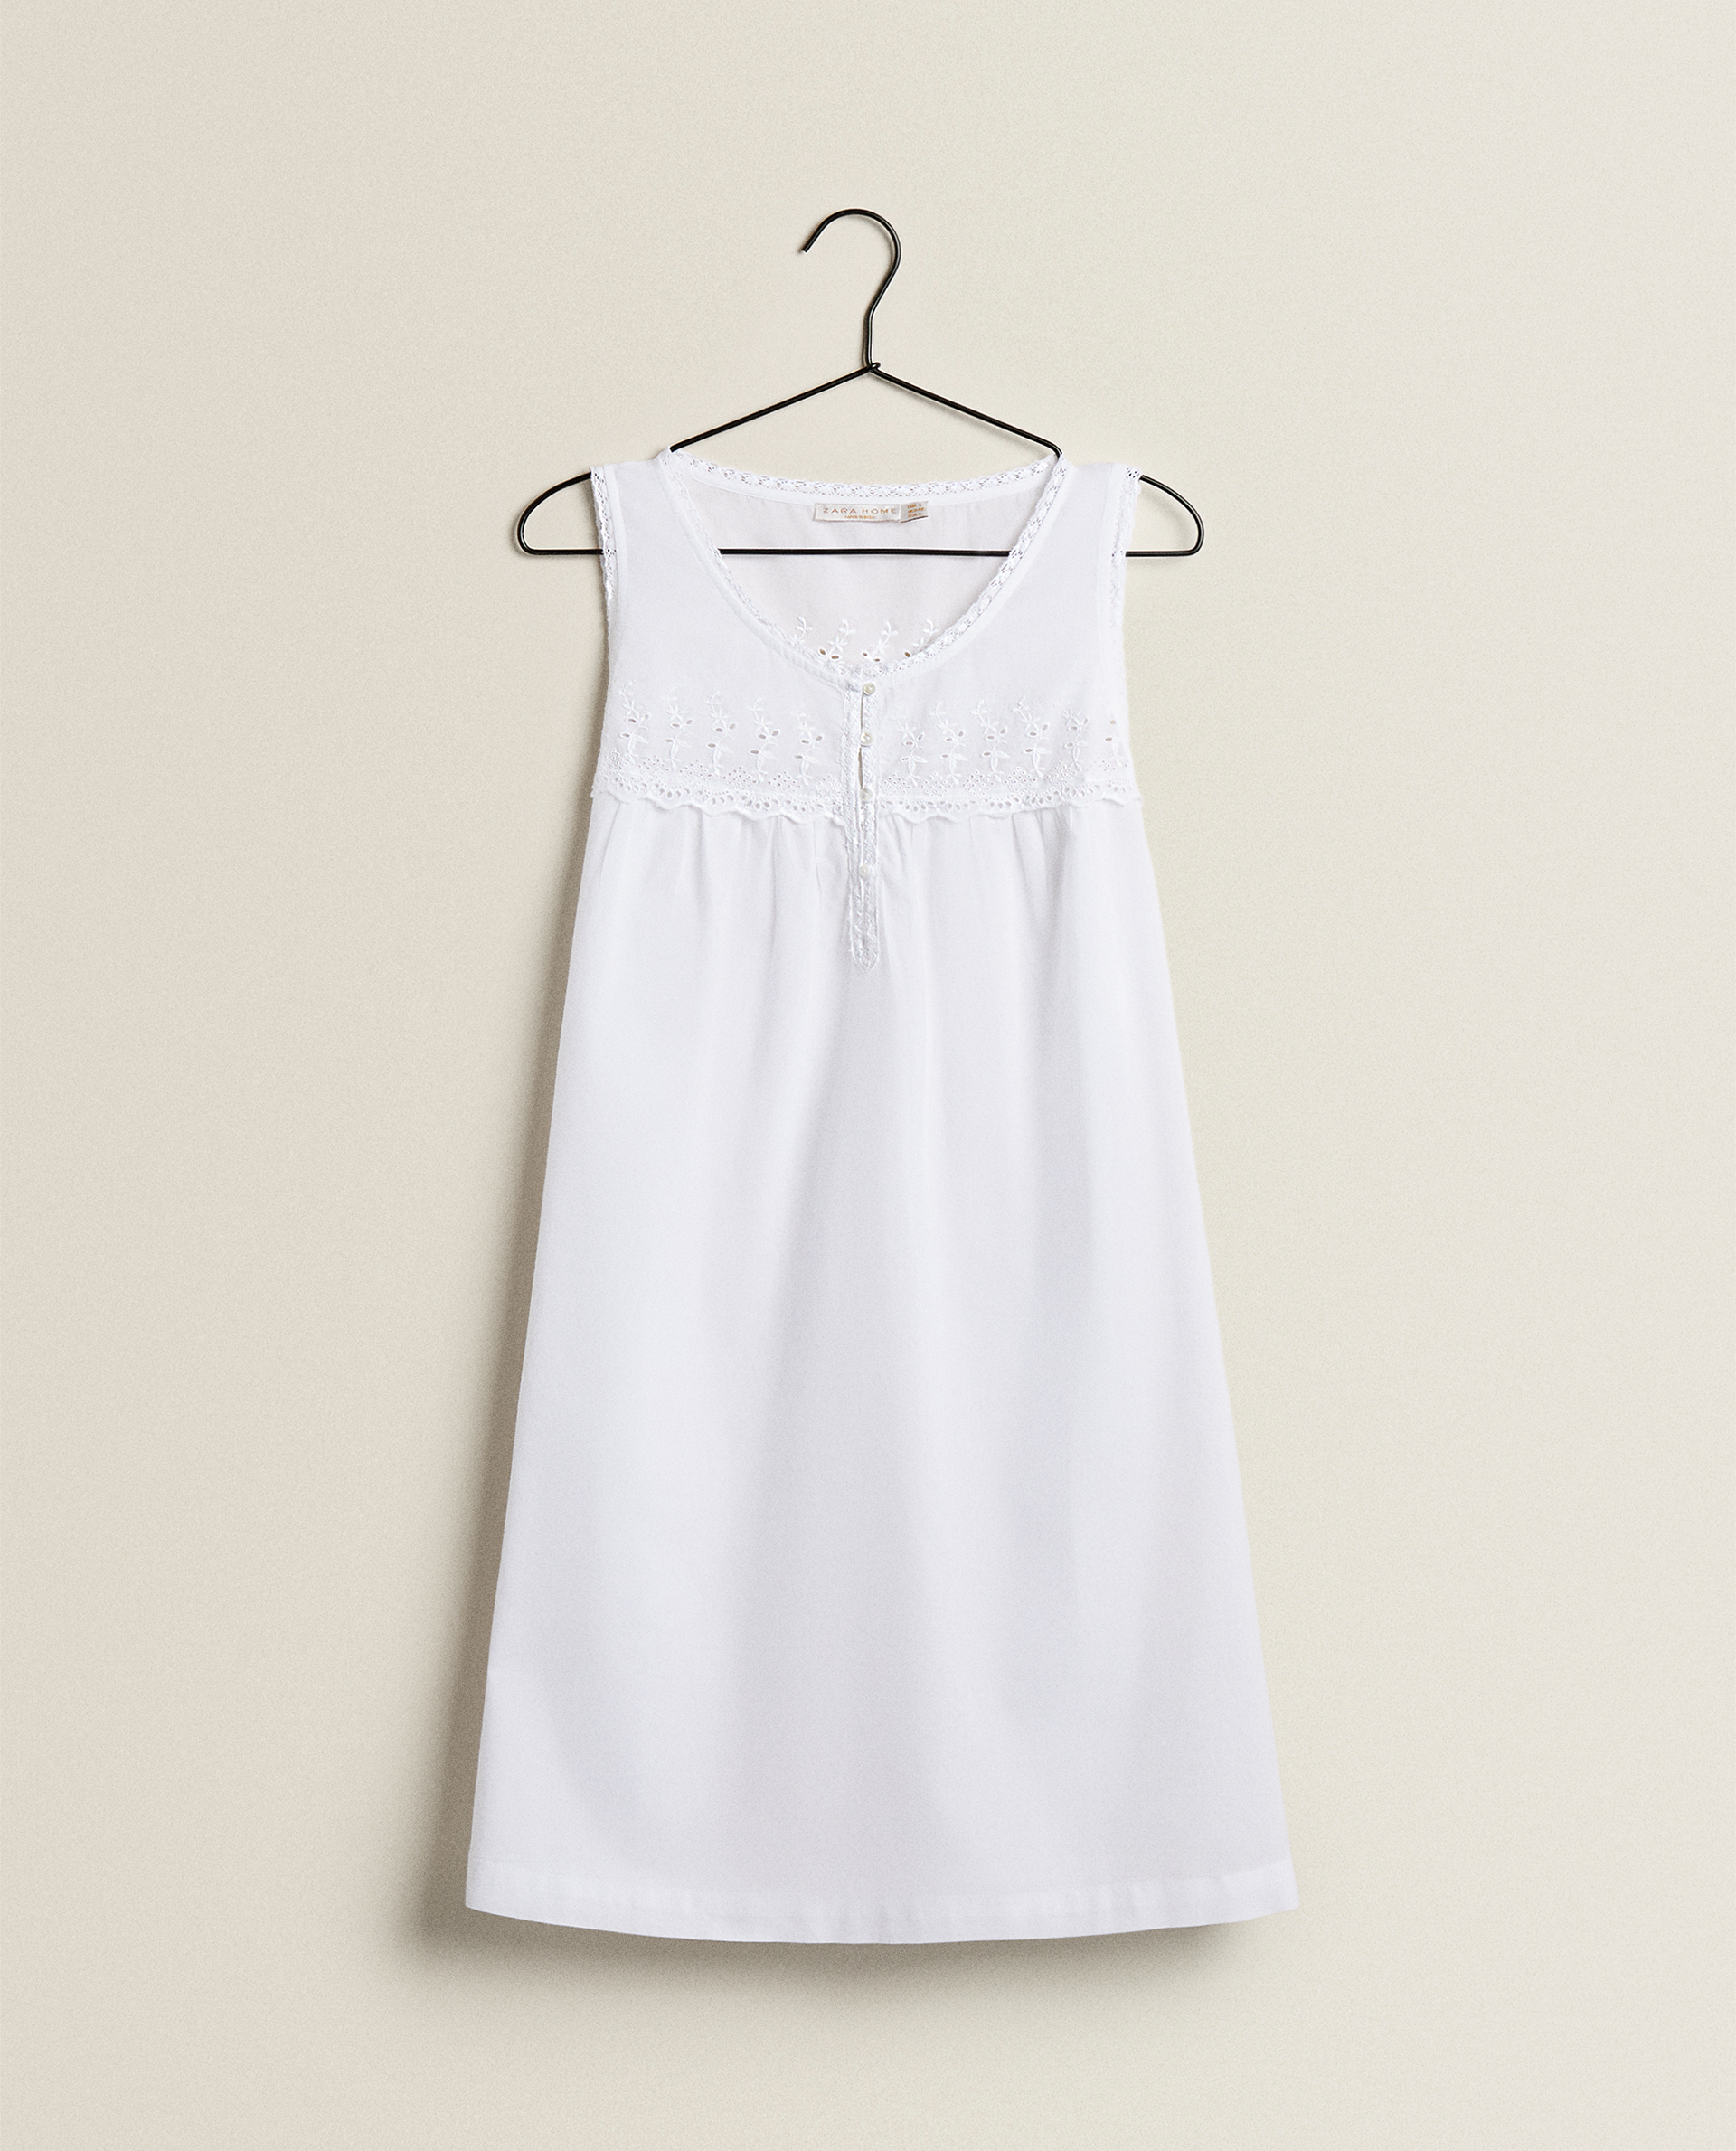 EMBROIDERED COTTON NIGHTGOWN | Home United States of America